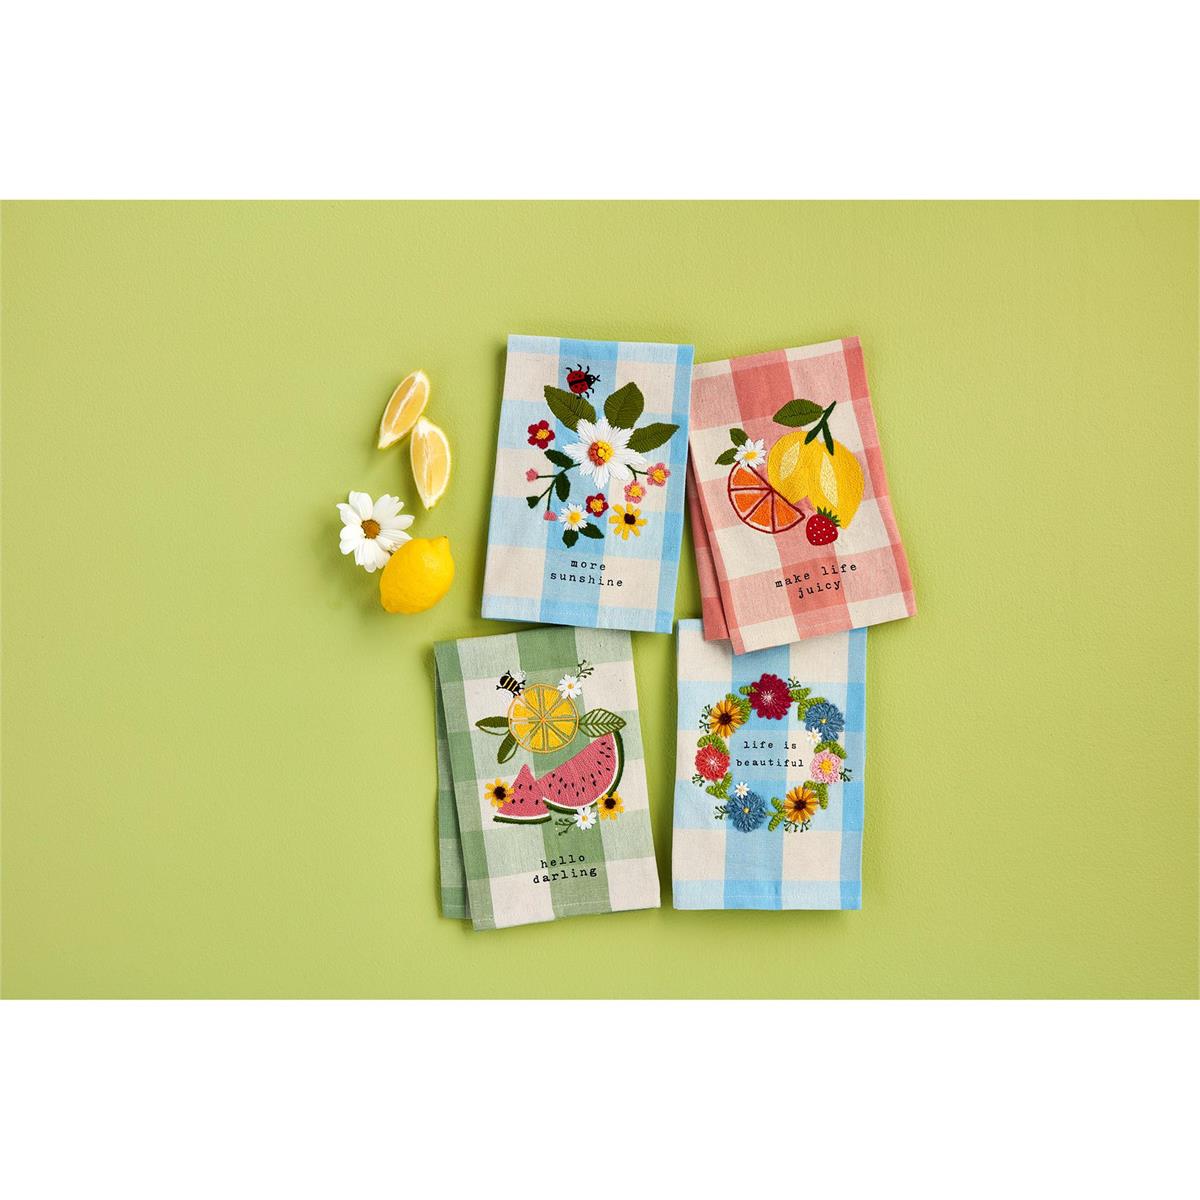 4 styles of fruity floral hand towels arranged on a light green background with lemons and a daisy.